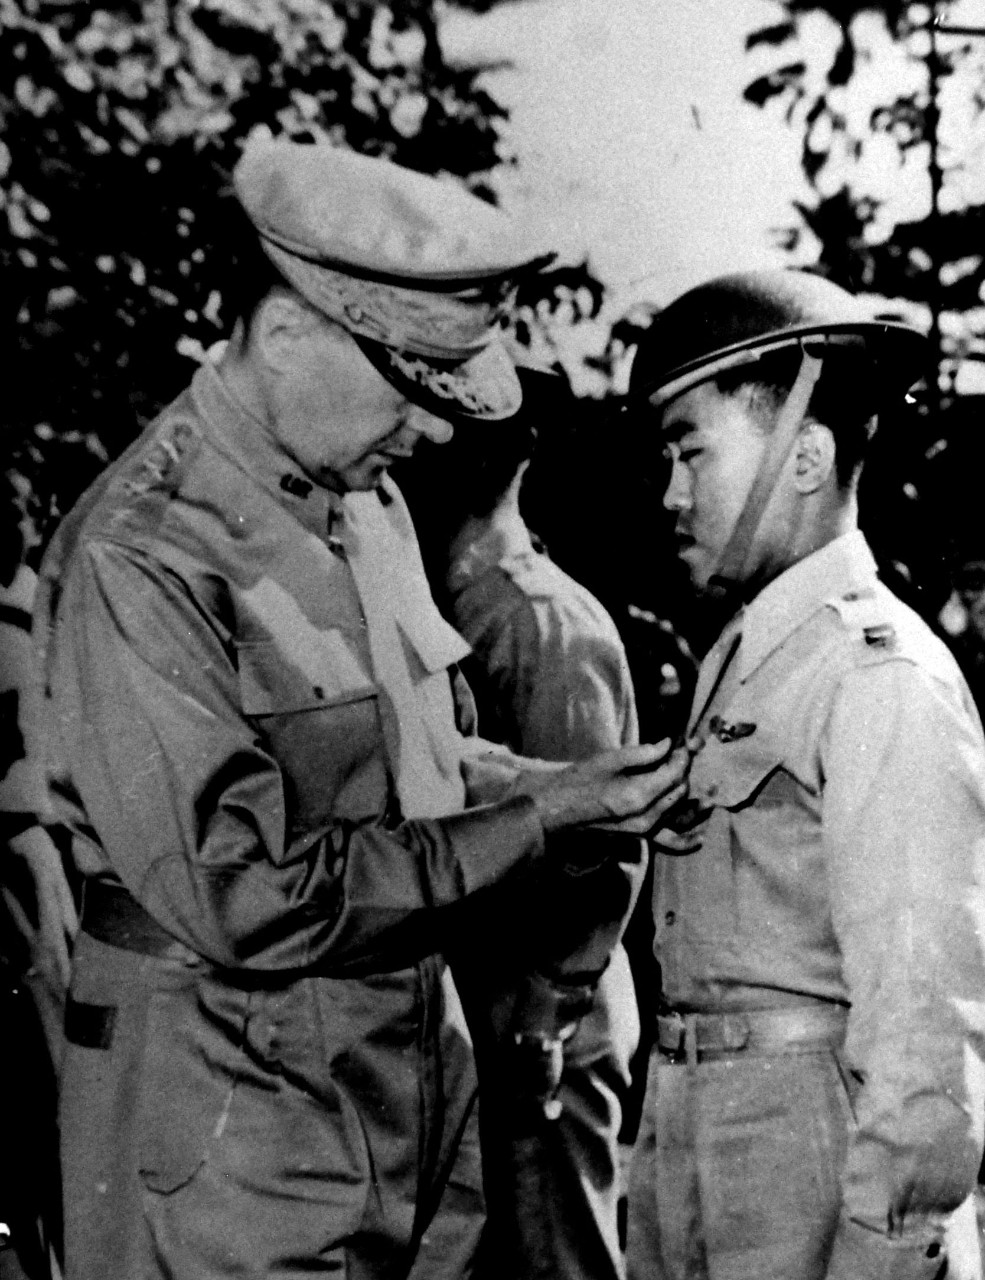 LC-Lot 9431-18:  Heroes of the Philippines, December 1941.  General Douglas MacArthur pins the Distinguished Service Cross on a member of his forces – Captain Jesus Villamor, the first Filipino hero to receive the high award.  This picture, taken soon after the Japanese invasion, is among the first photographs received of action during the war in the Philippines.  The Distinguished Service Cross is the U.S. Army’s version of the Navy Cross.  Villamor received the award for his actions in December 1941. The Philippines would fall in the spring of 1942 to the Japanese, and U.S. would not return until  October 1944.   The U.S. Navy would play a vital part in returning the Philippines back to the Allies.   Office of War Information photograph. Courtesy of the Library of Congress.  